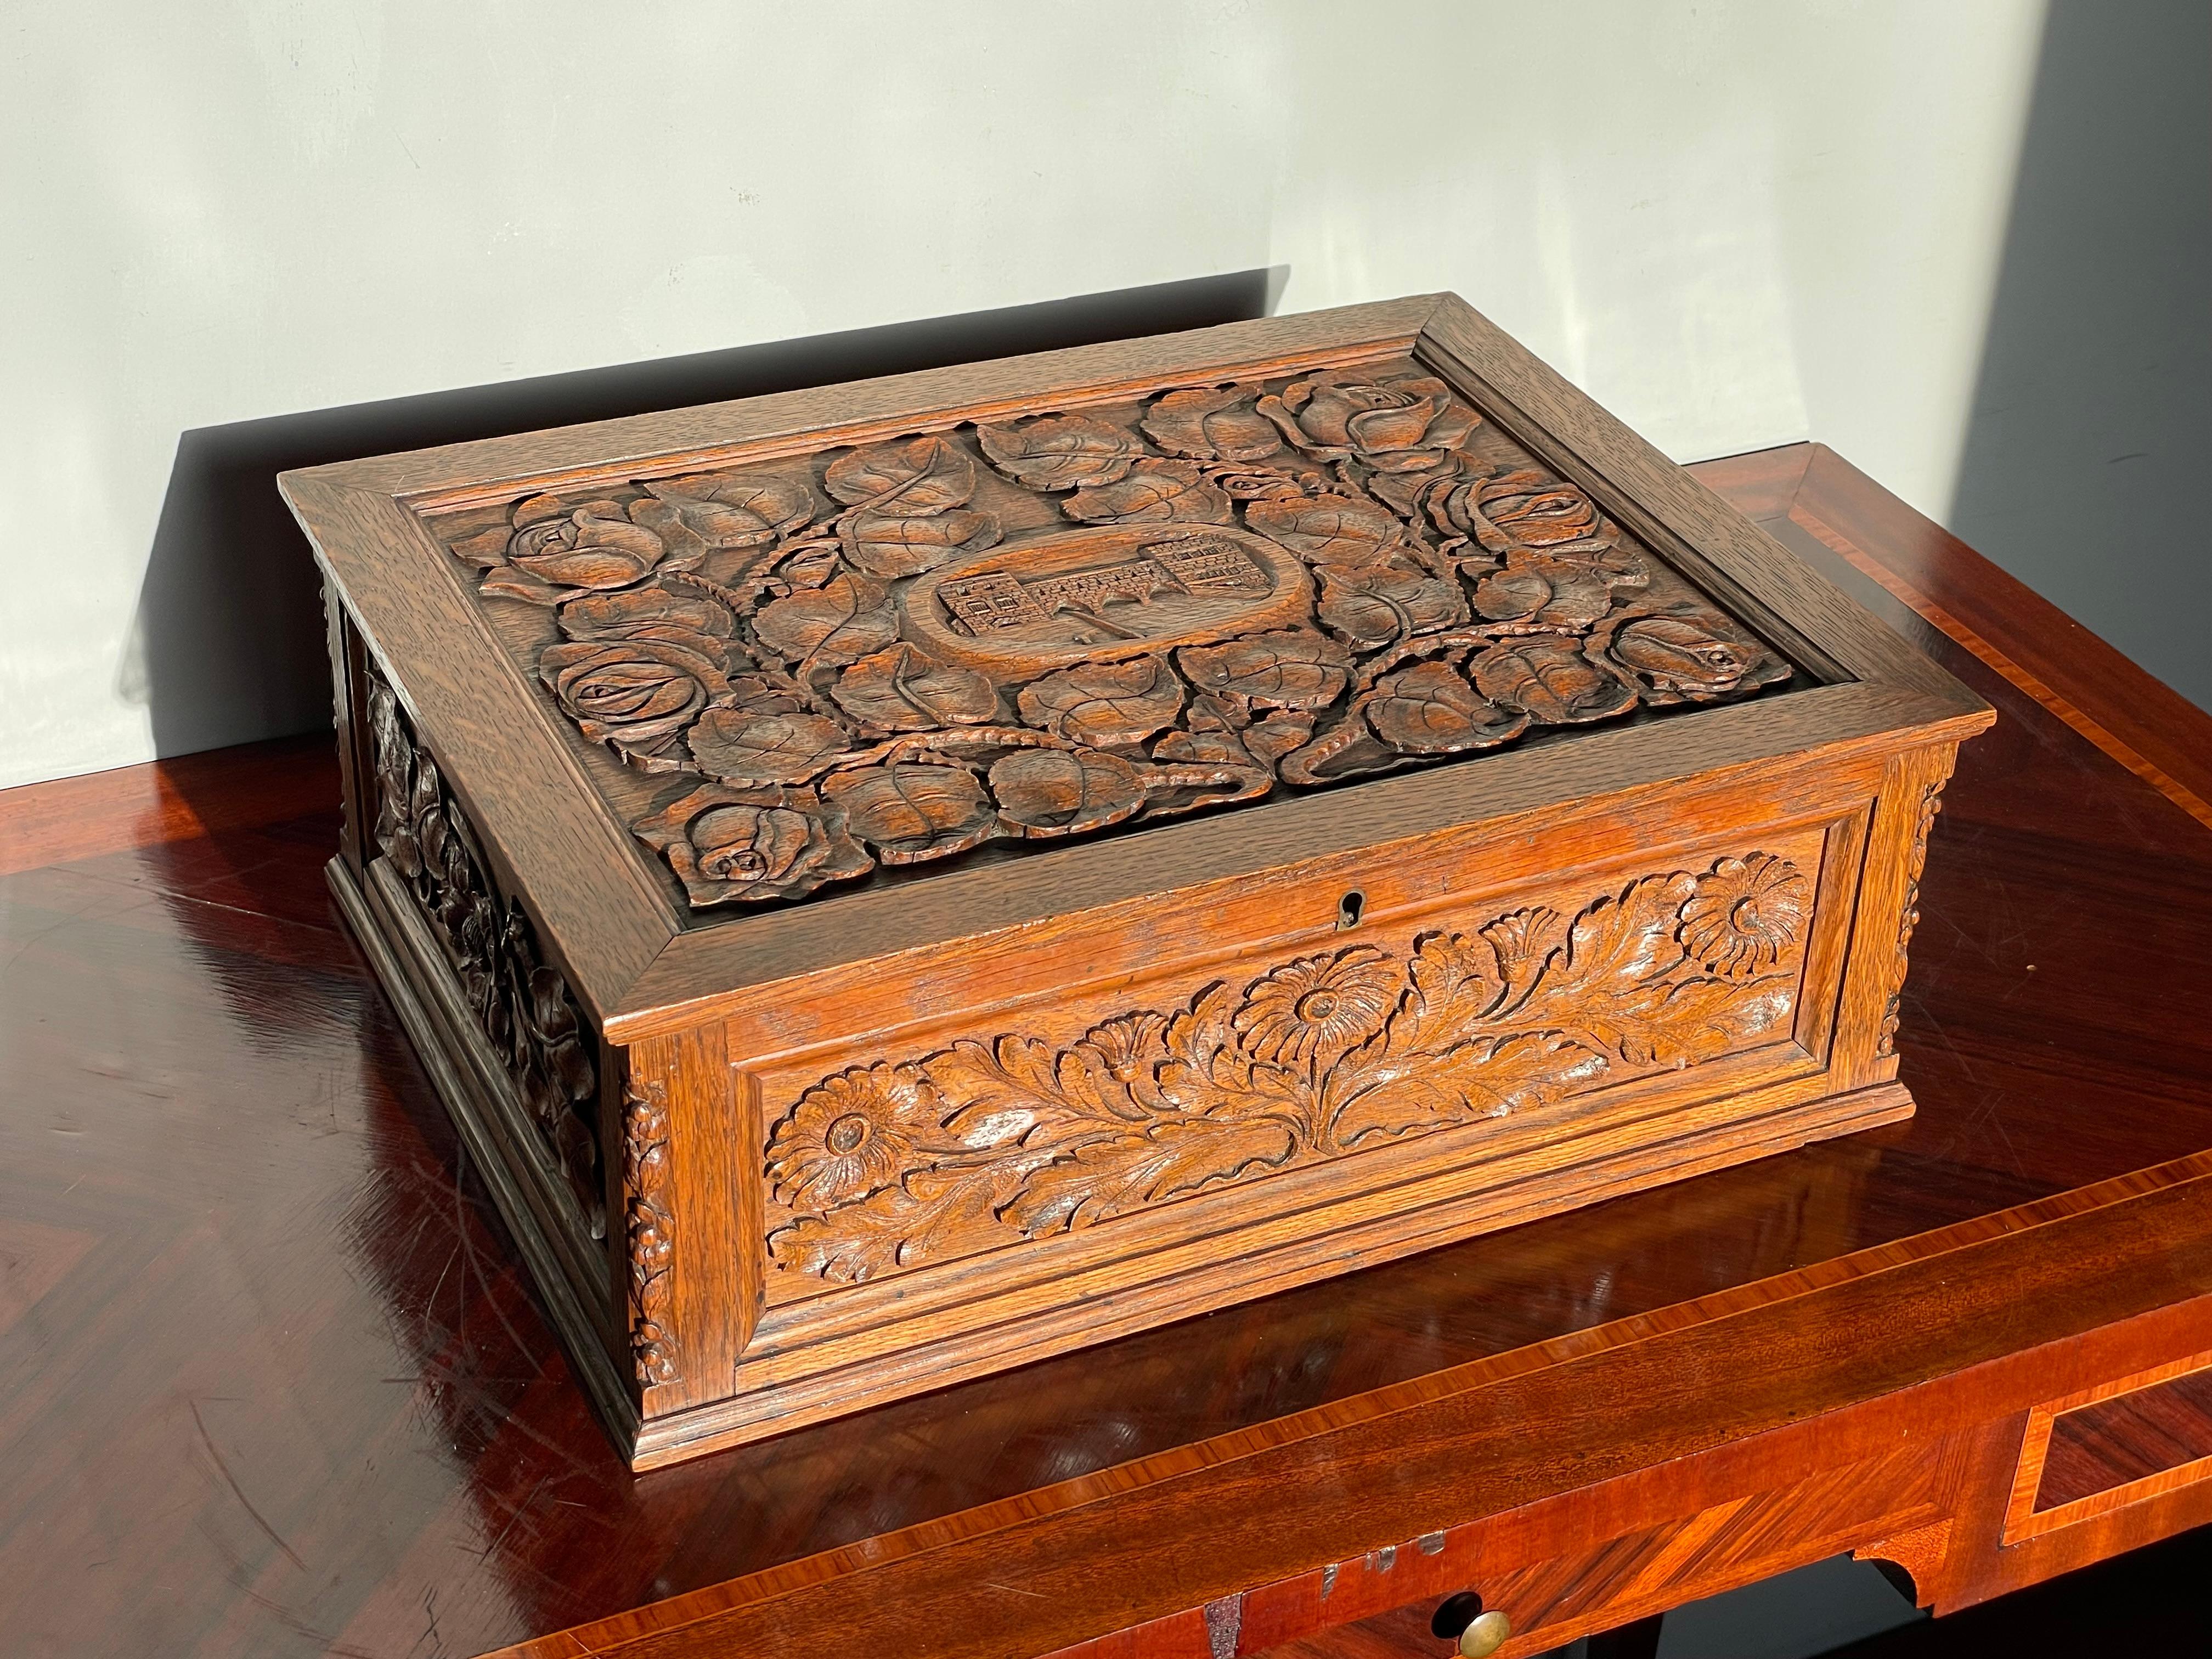 Hand-Carved Museum Quality Carved Arts and Crafts Box w. Compartments, Rose Sculptures Etc. For Sale